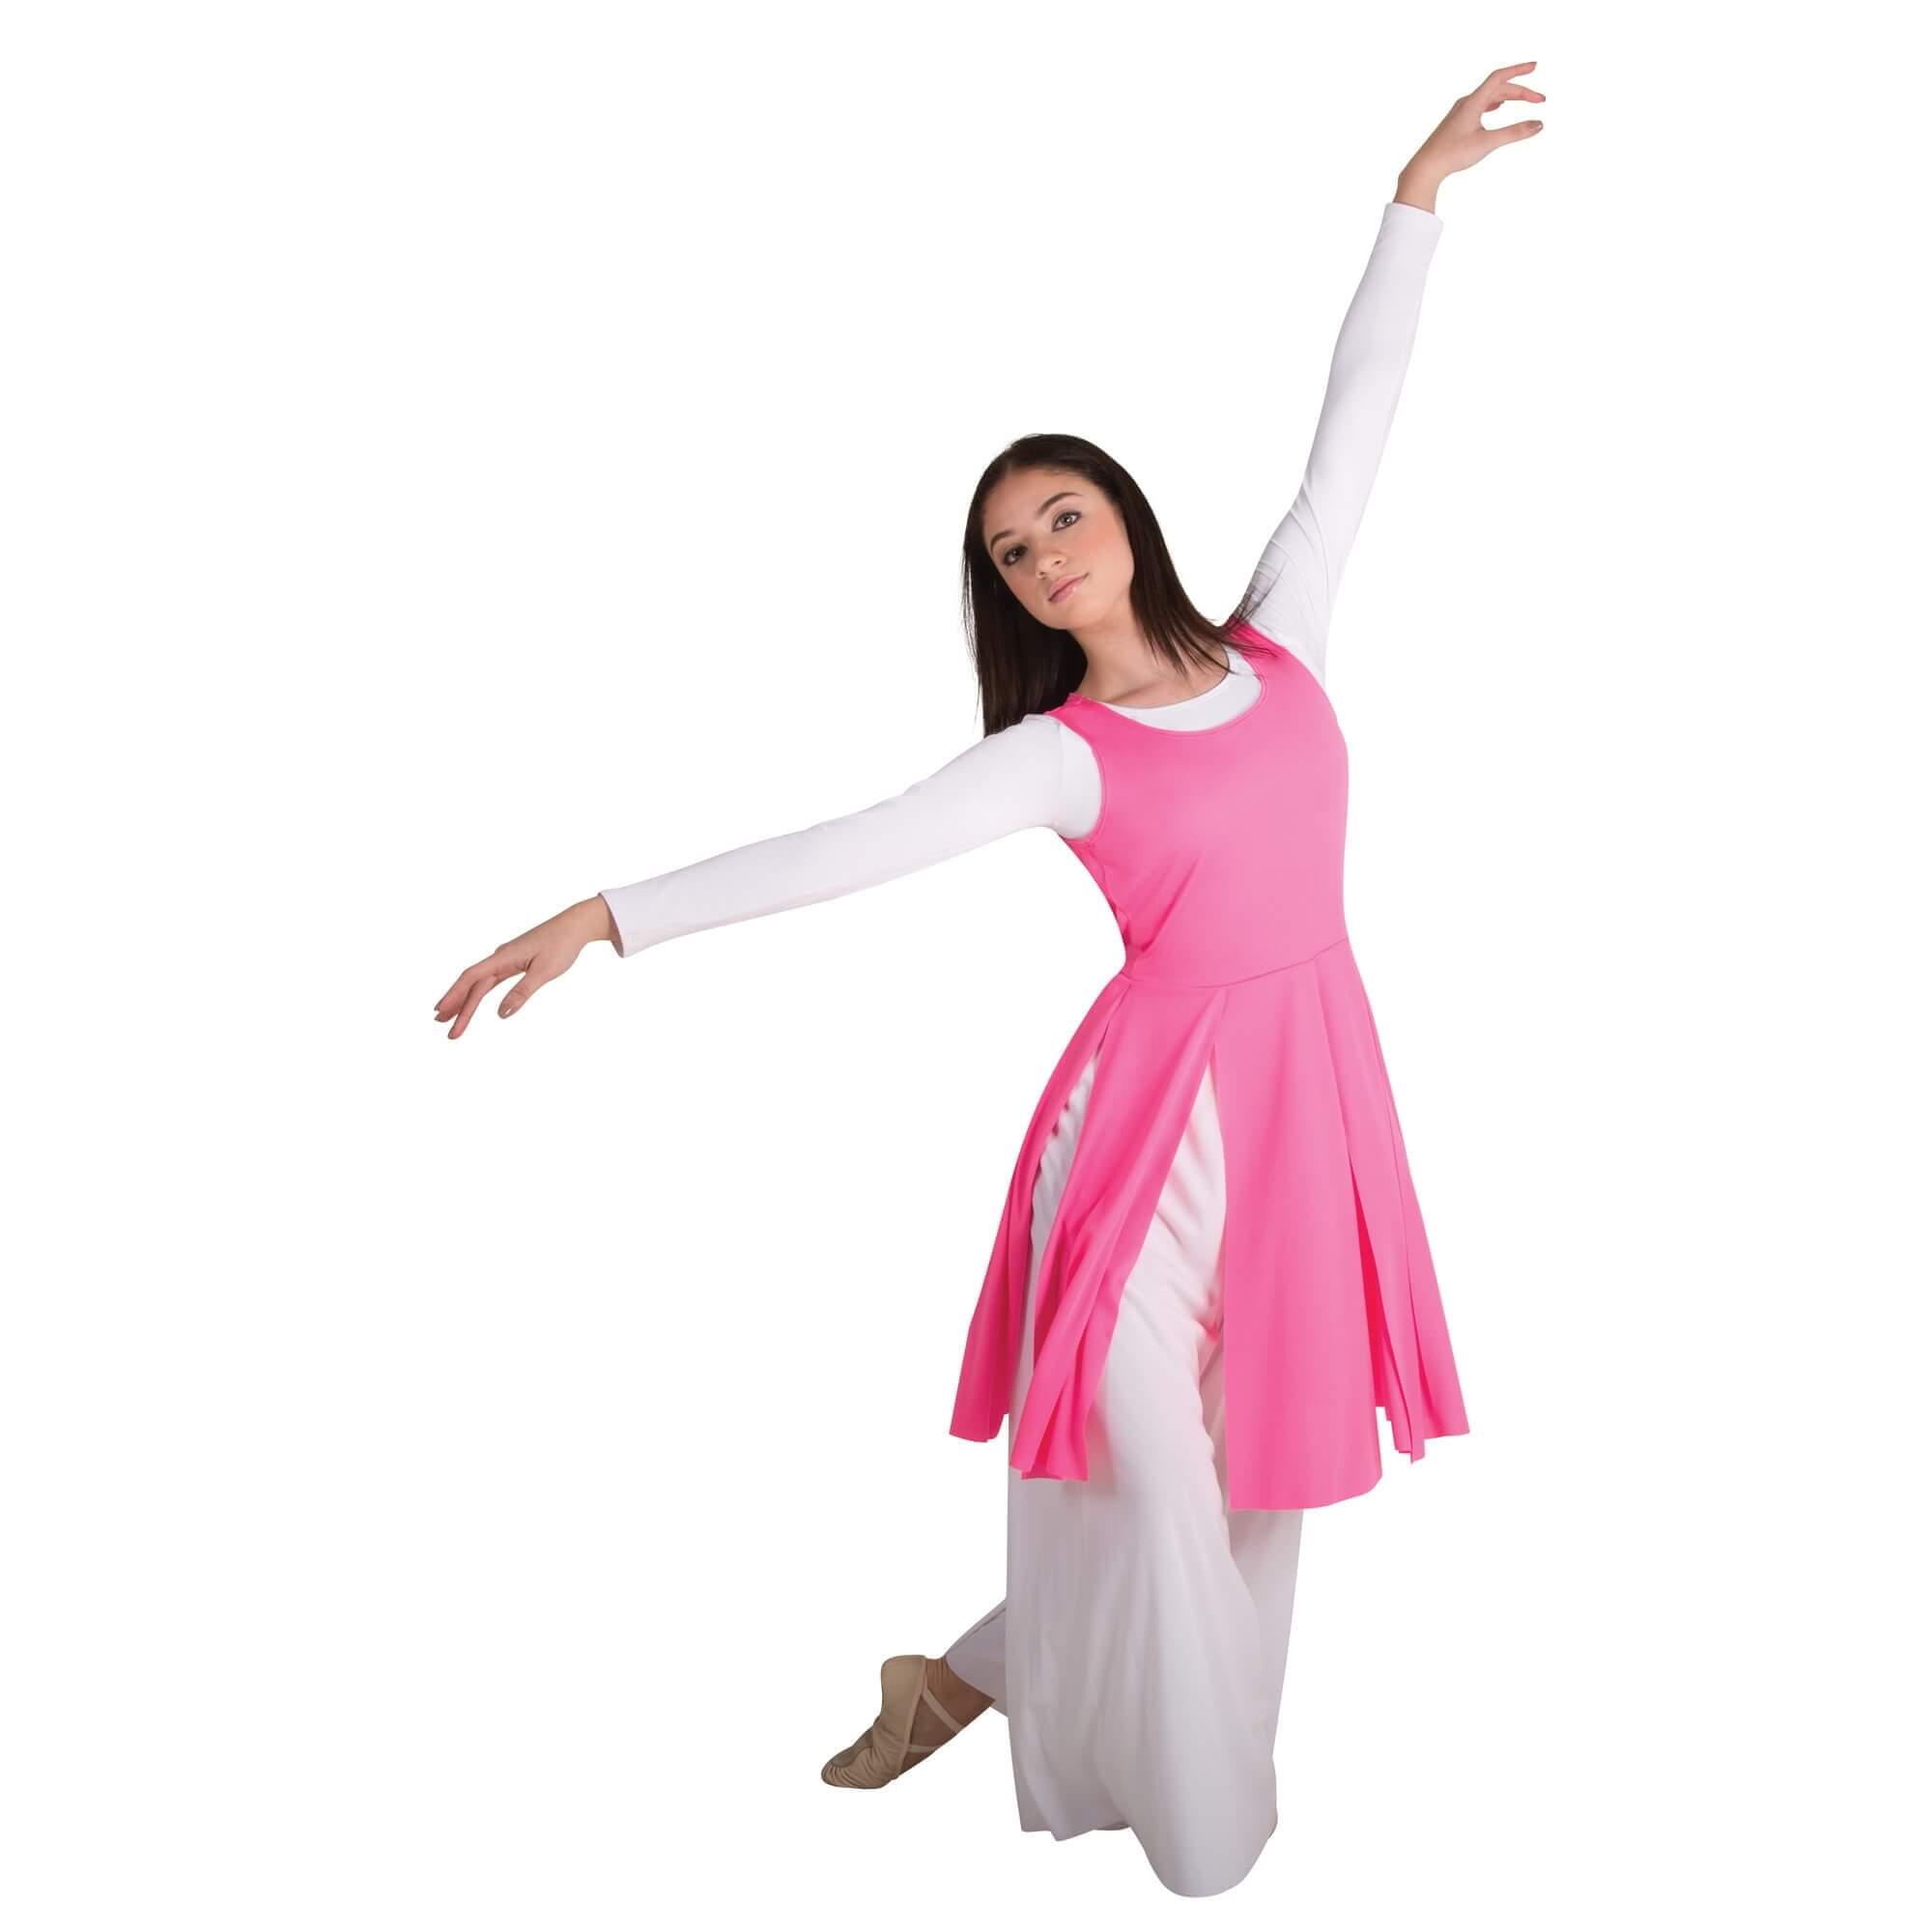 Body Wrappers Liturgical Dance Fly-Away Panel Tunic - Click Image to Close